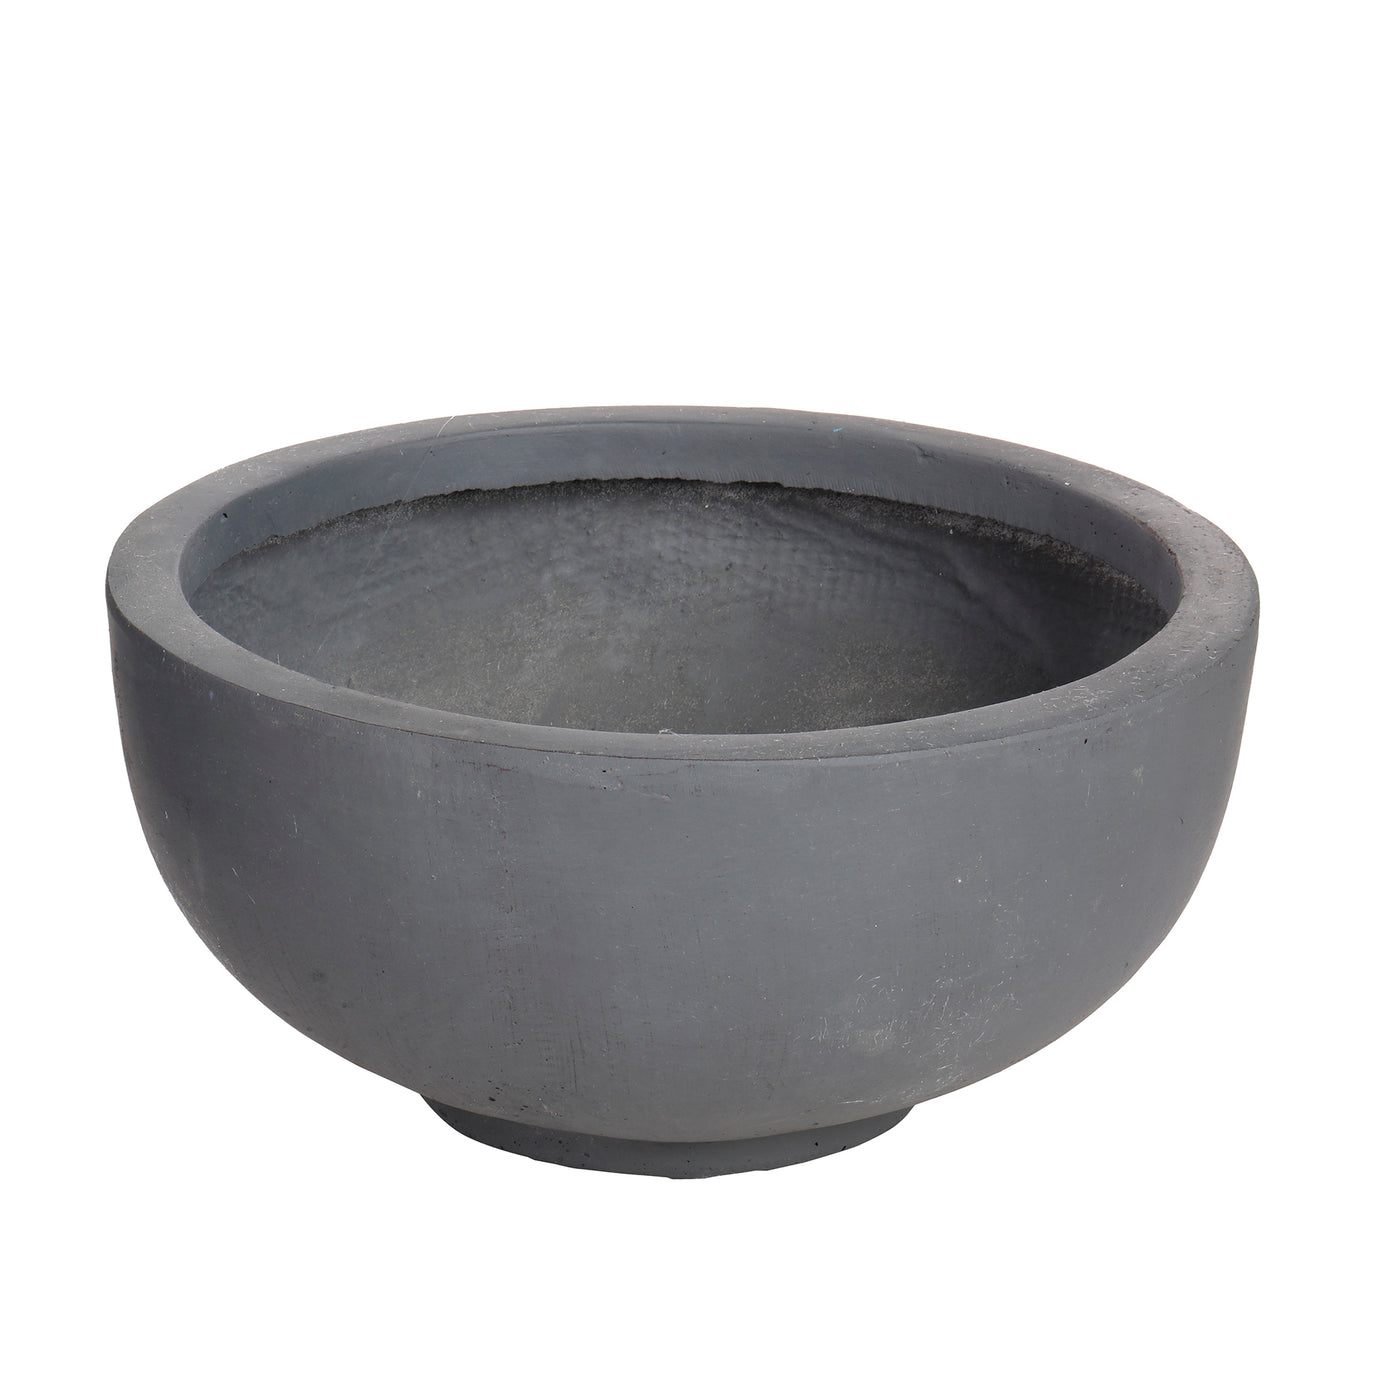 Finest quality stonecast bowl planter in charcoal